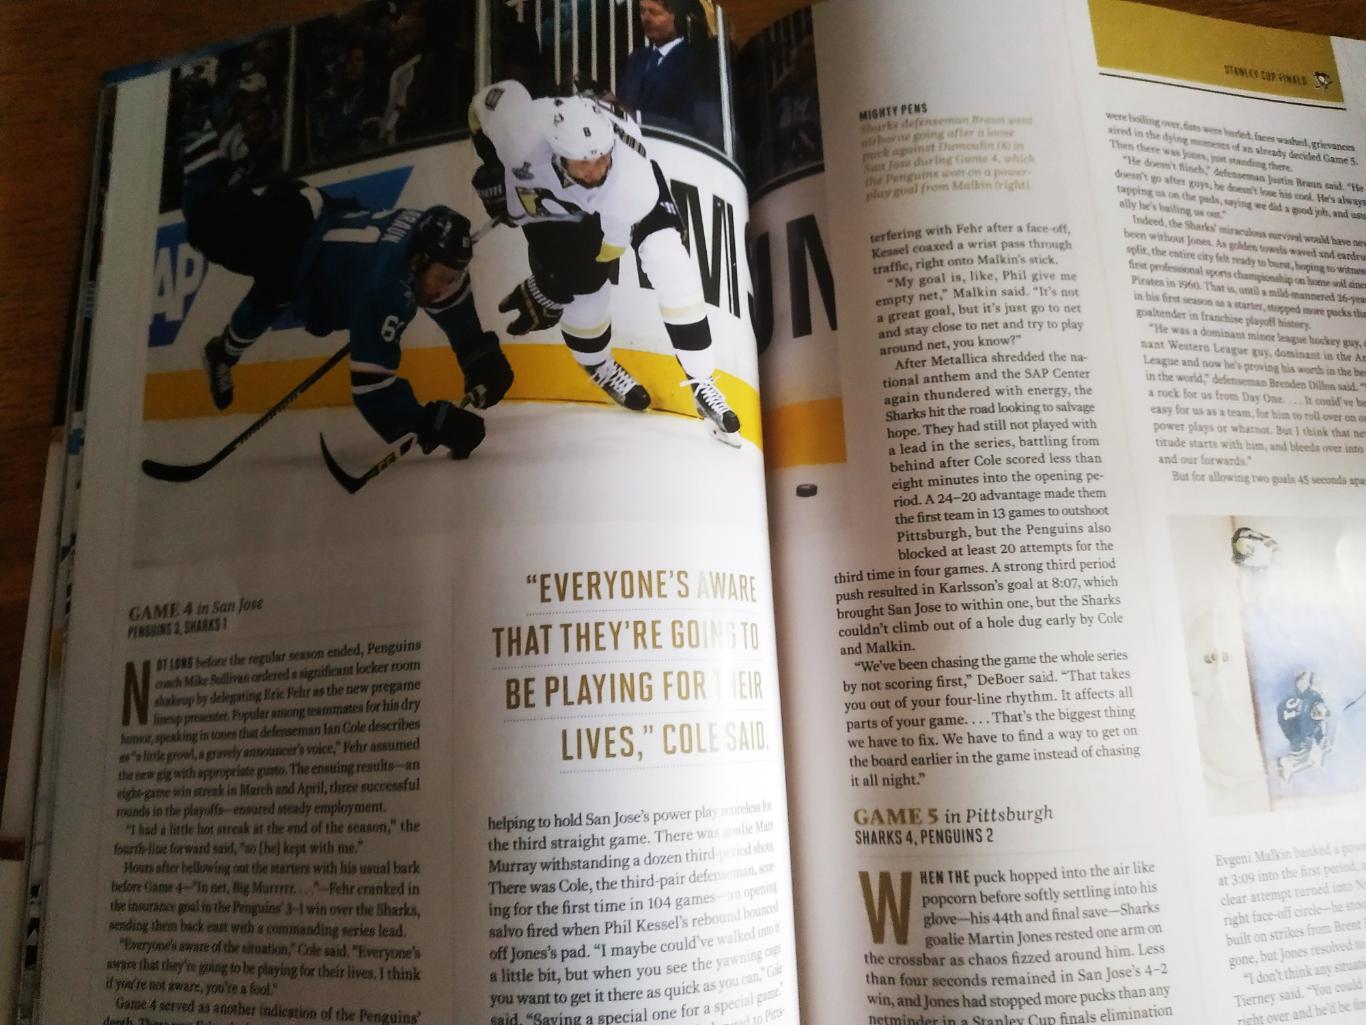 ЖУРНАЛ НХЛ NHL SPORTS ILLUSTRATED 2016 PITTSBURGH PENGUINS STANLEY CUP CHAMPIONS 3